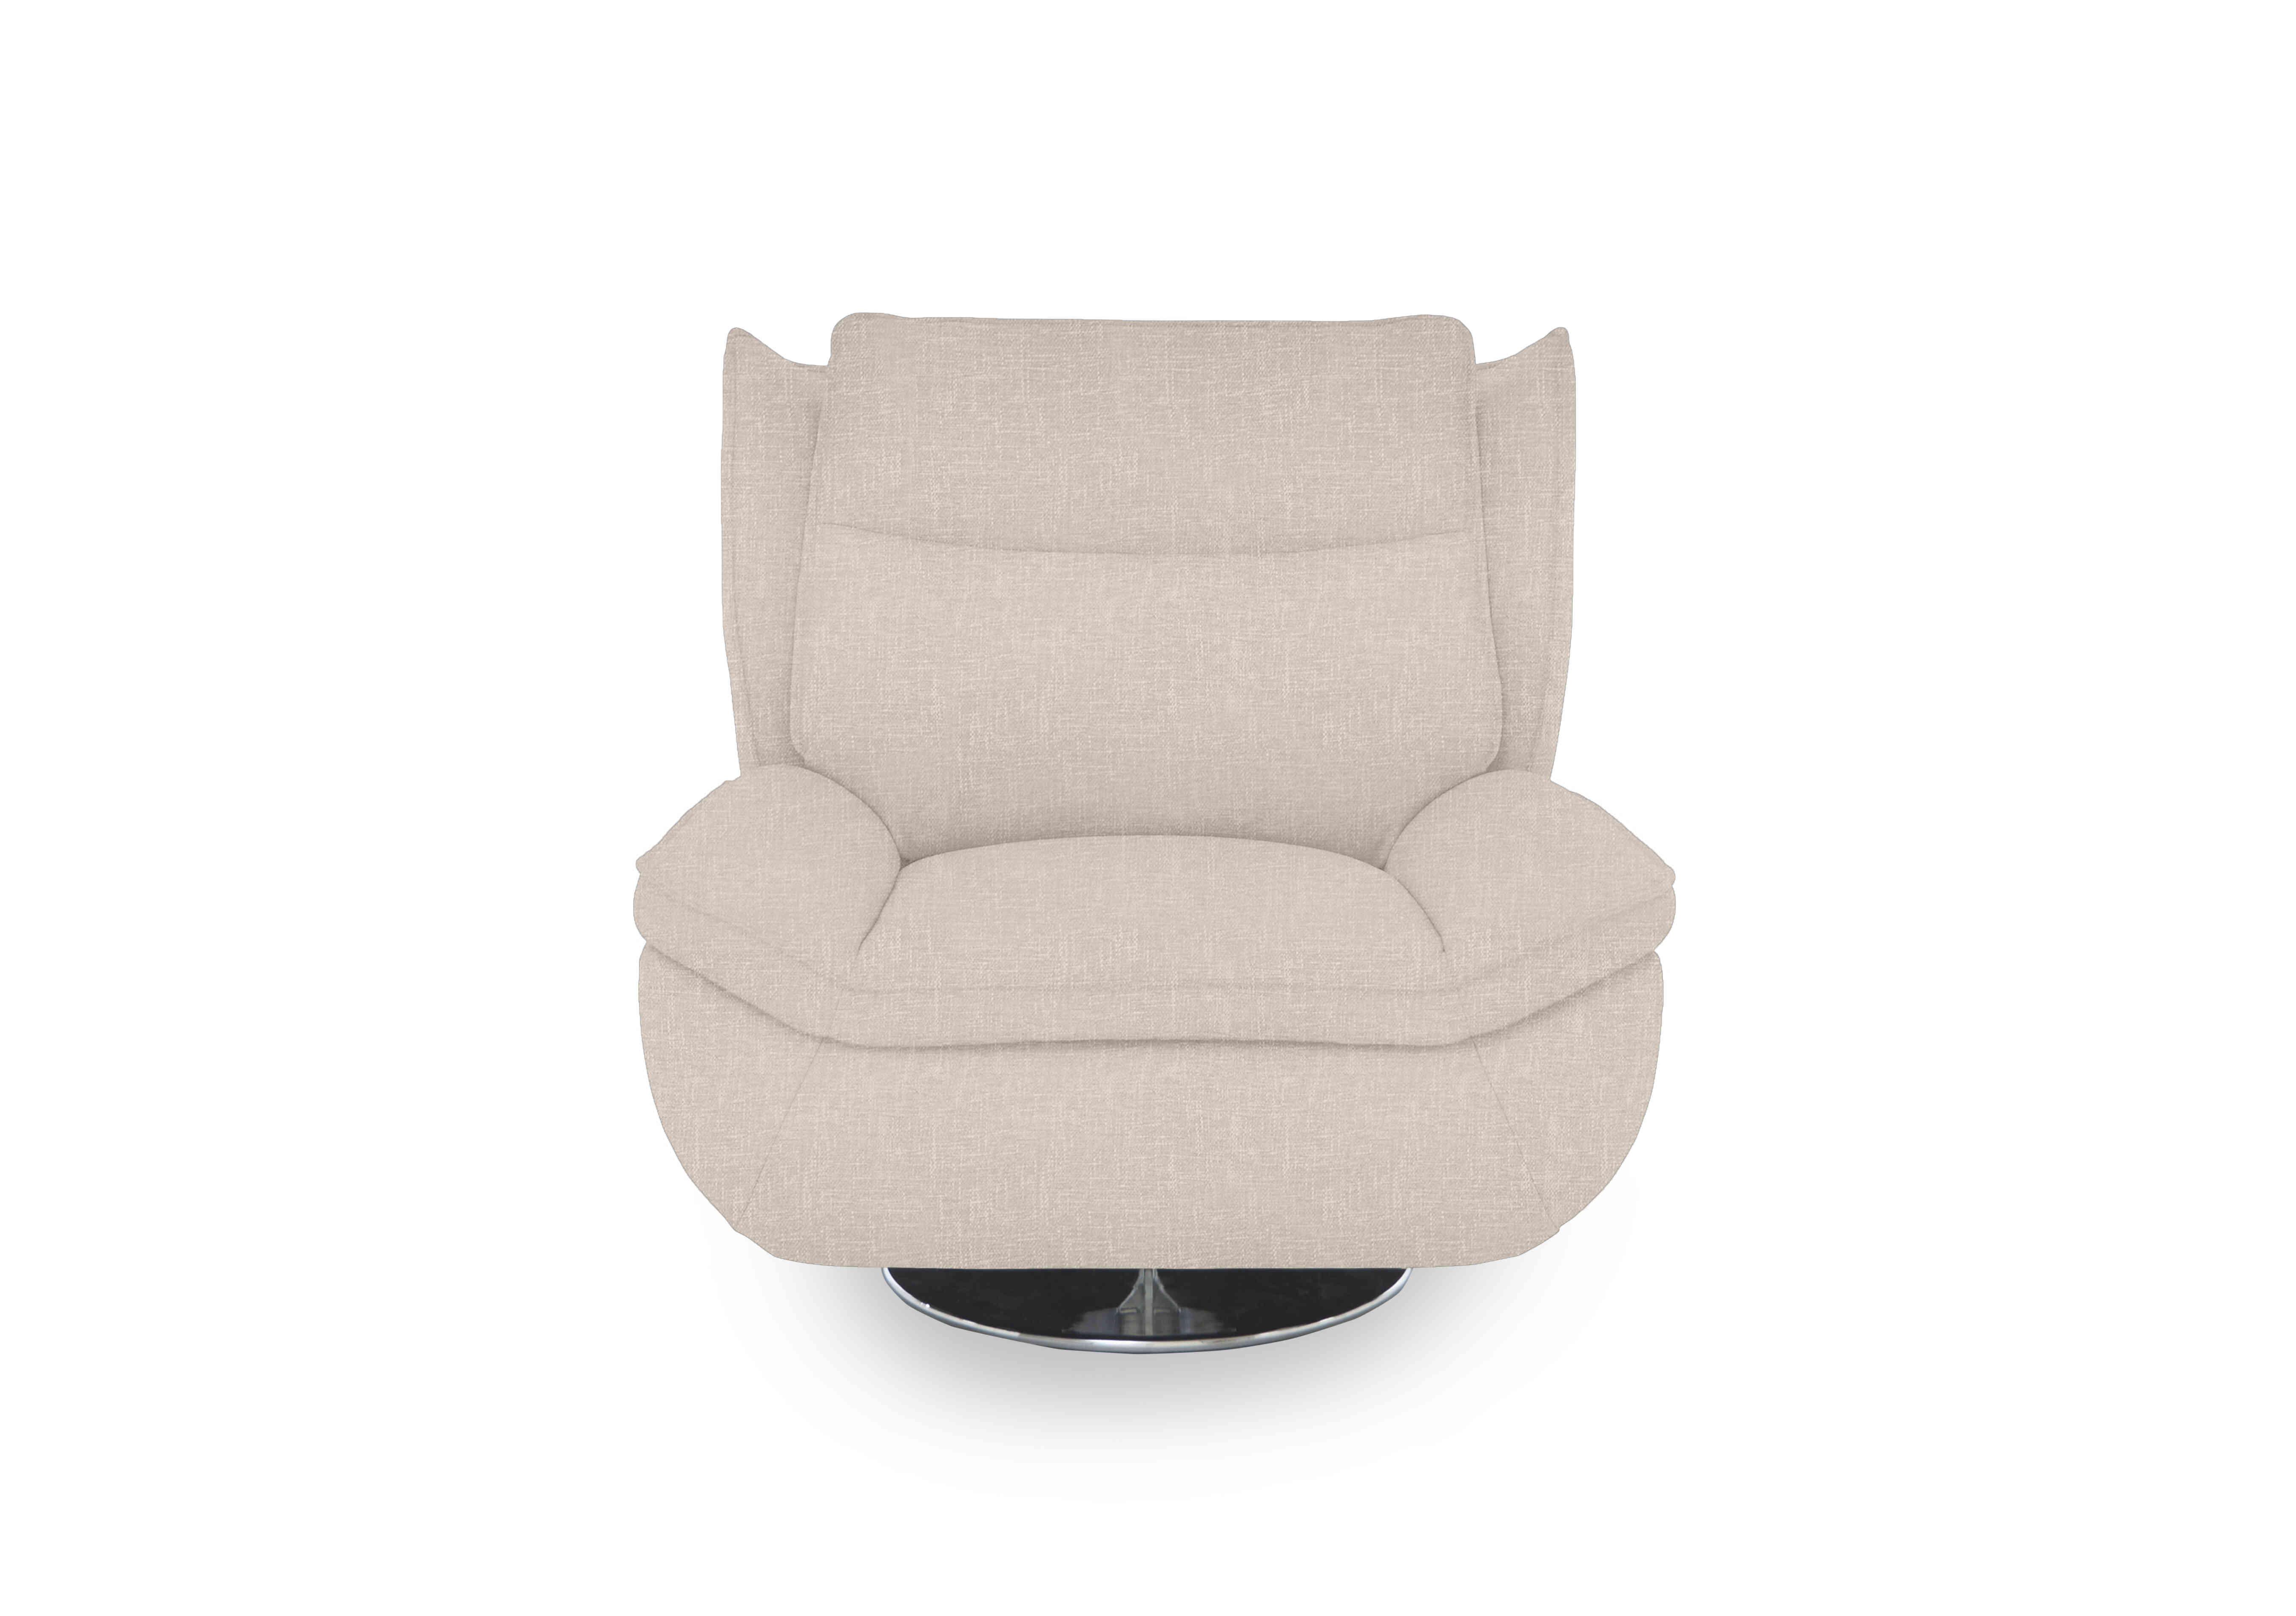 Vinny Fabric Swivel Chair in 13445 Anivia Nature on Furniture Village